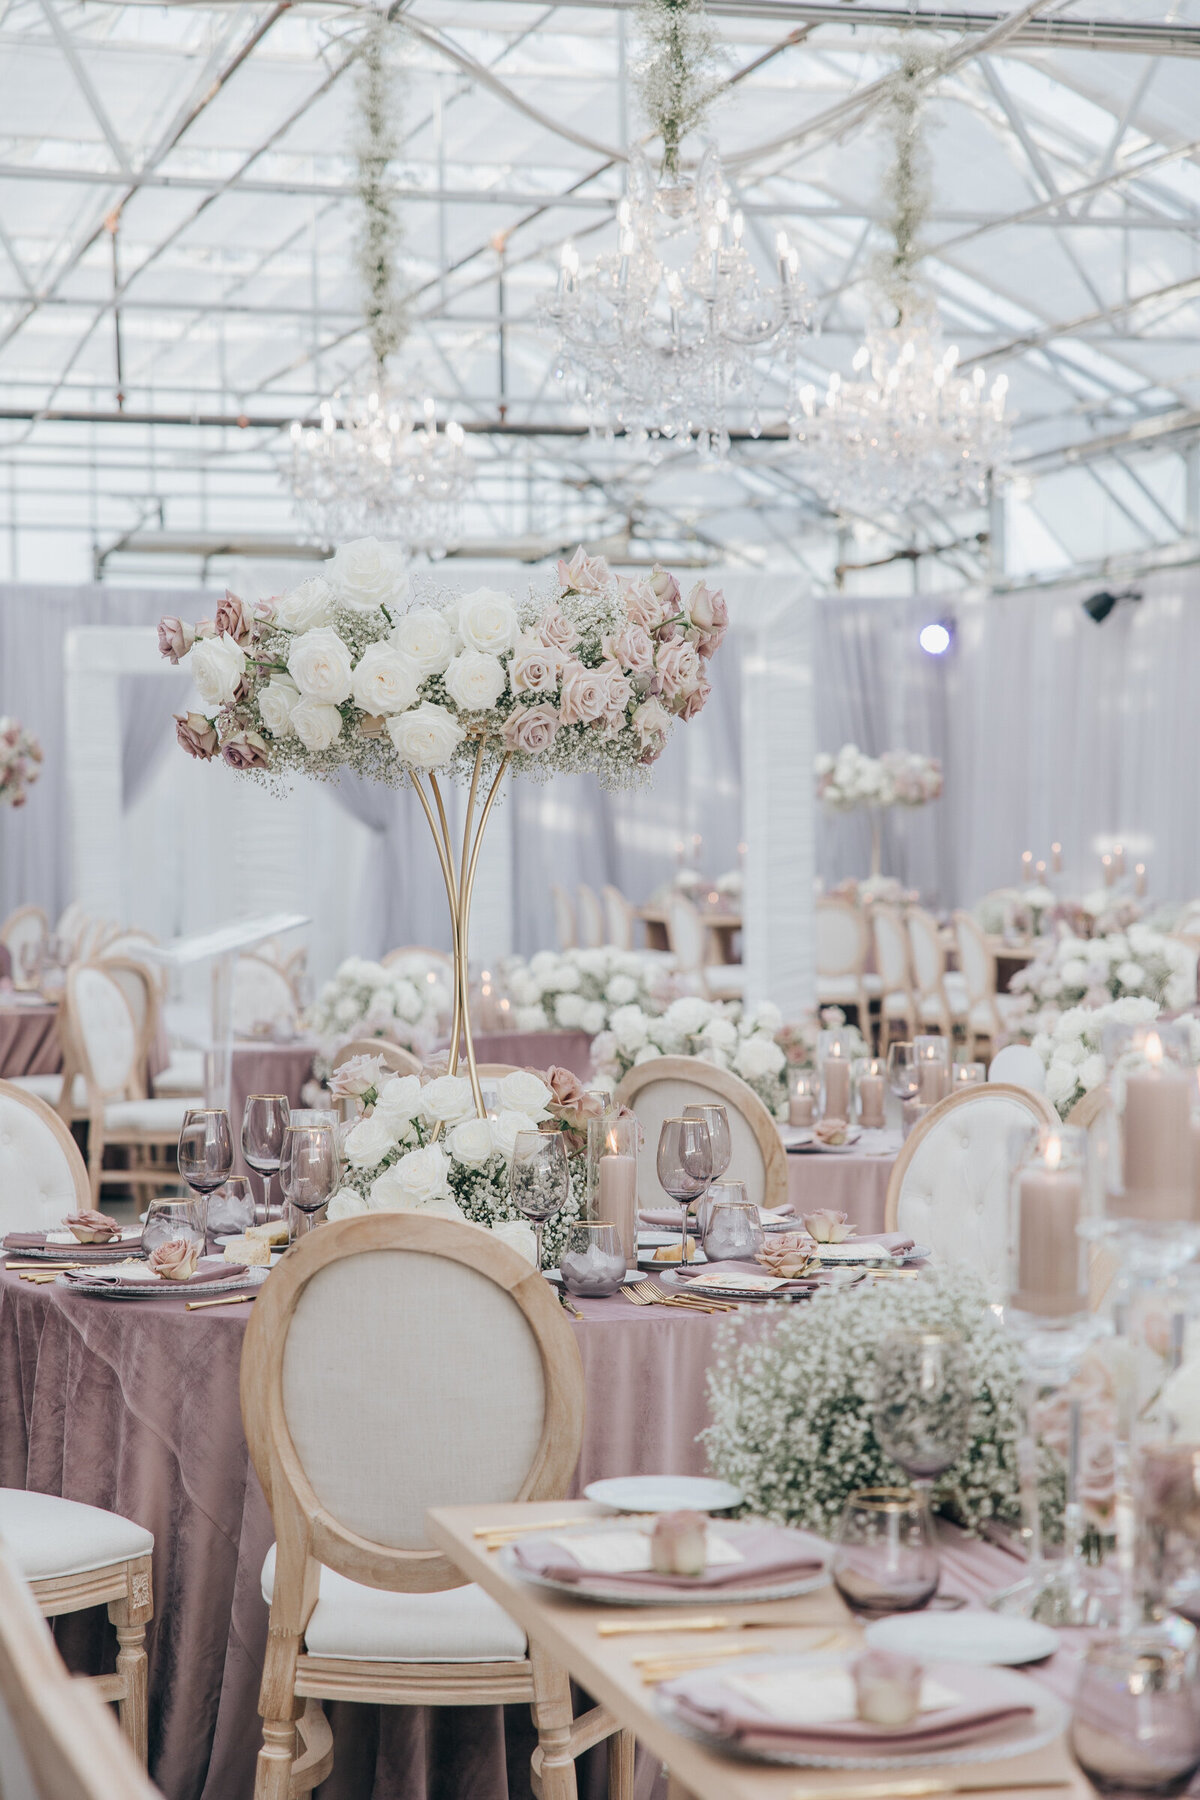 Exquisite wedding dinner with lavender tablecloths decorated with blush roses